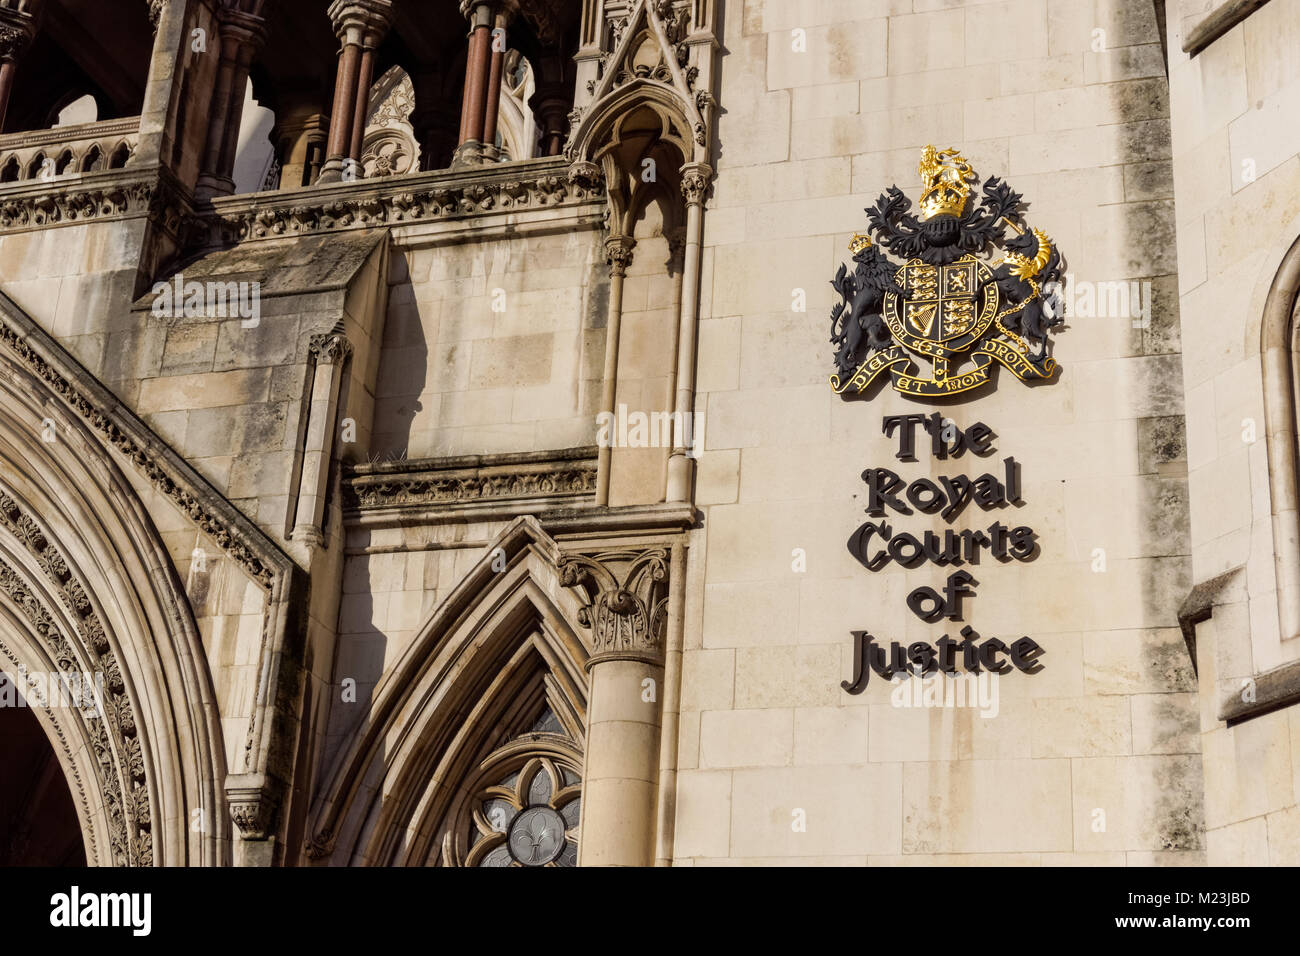 The Royal Courts of Justice on Strand in London, England, United Kingdom, UK Stock Photo